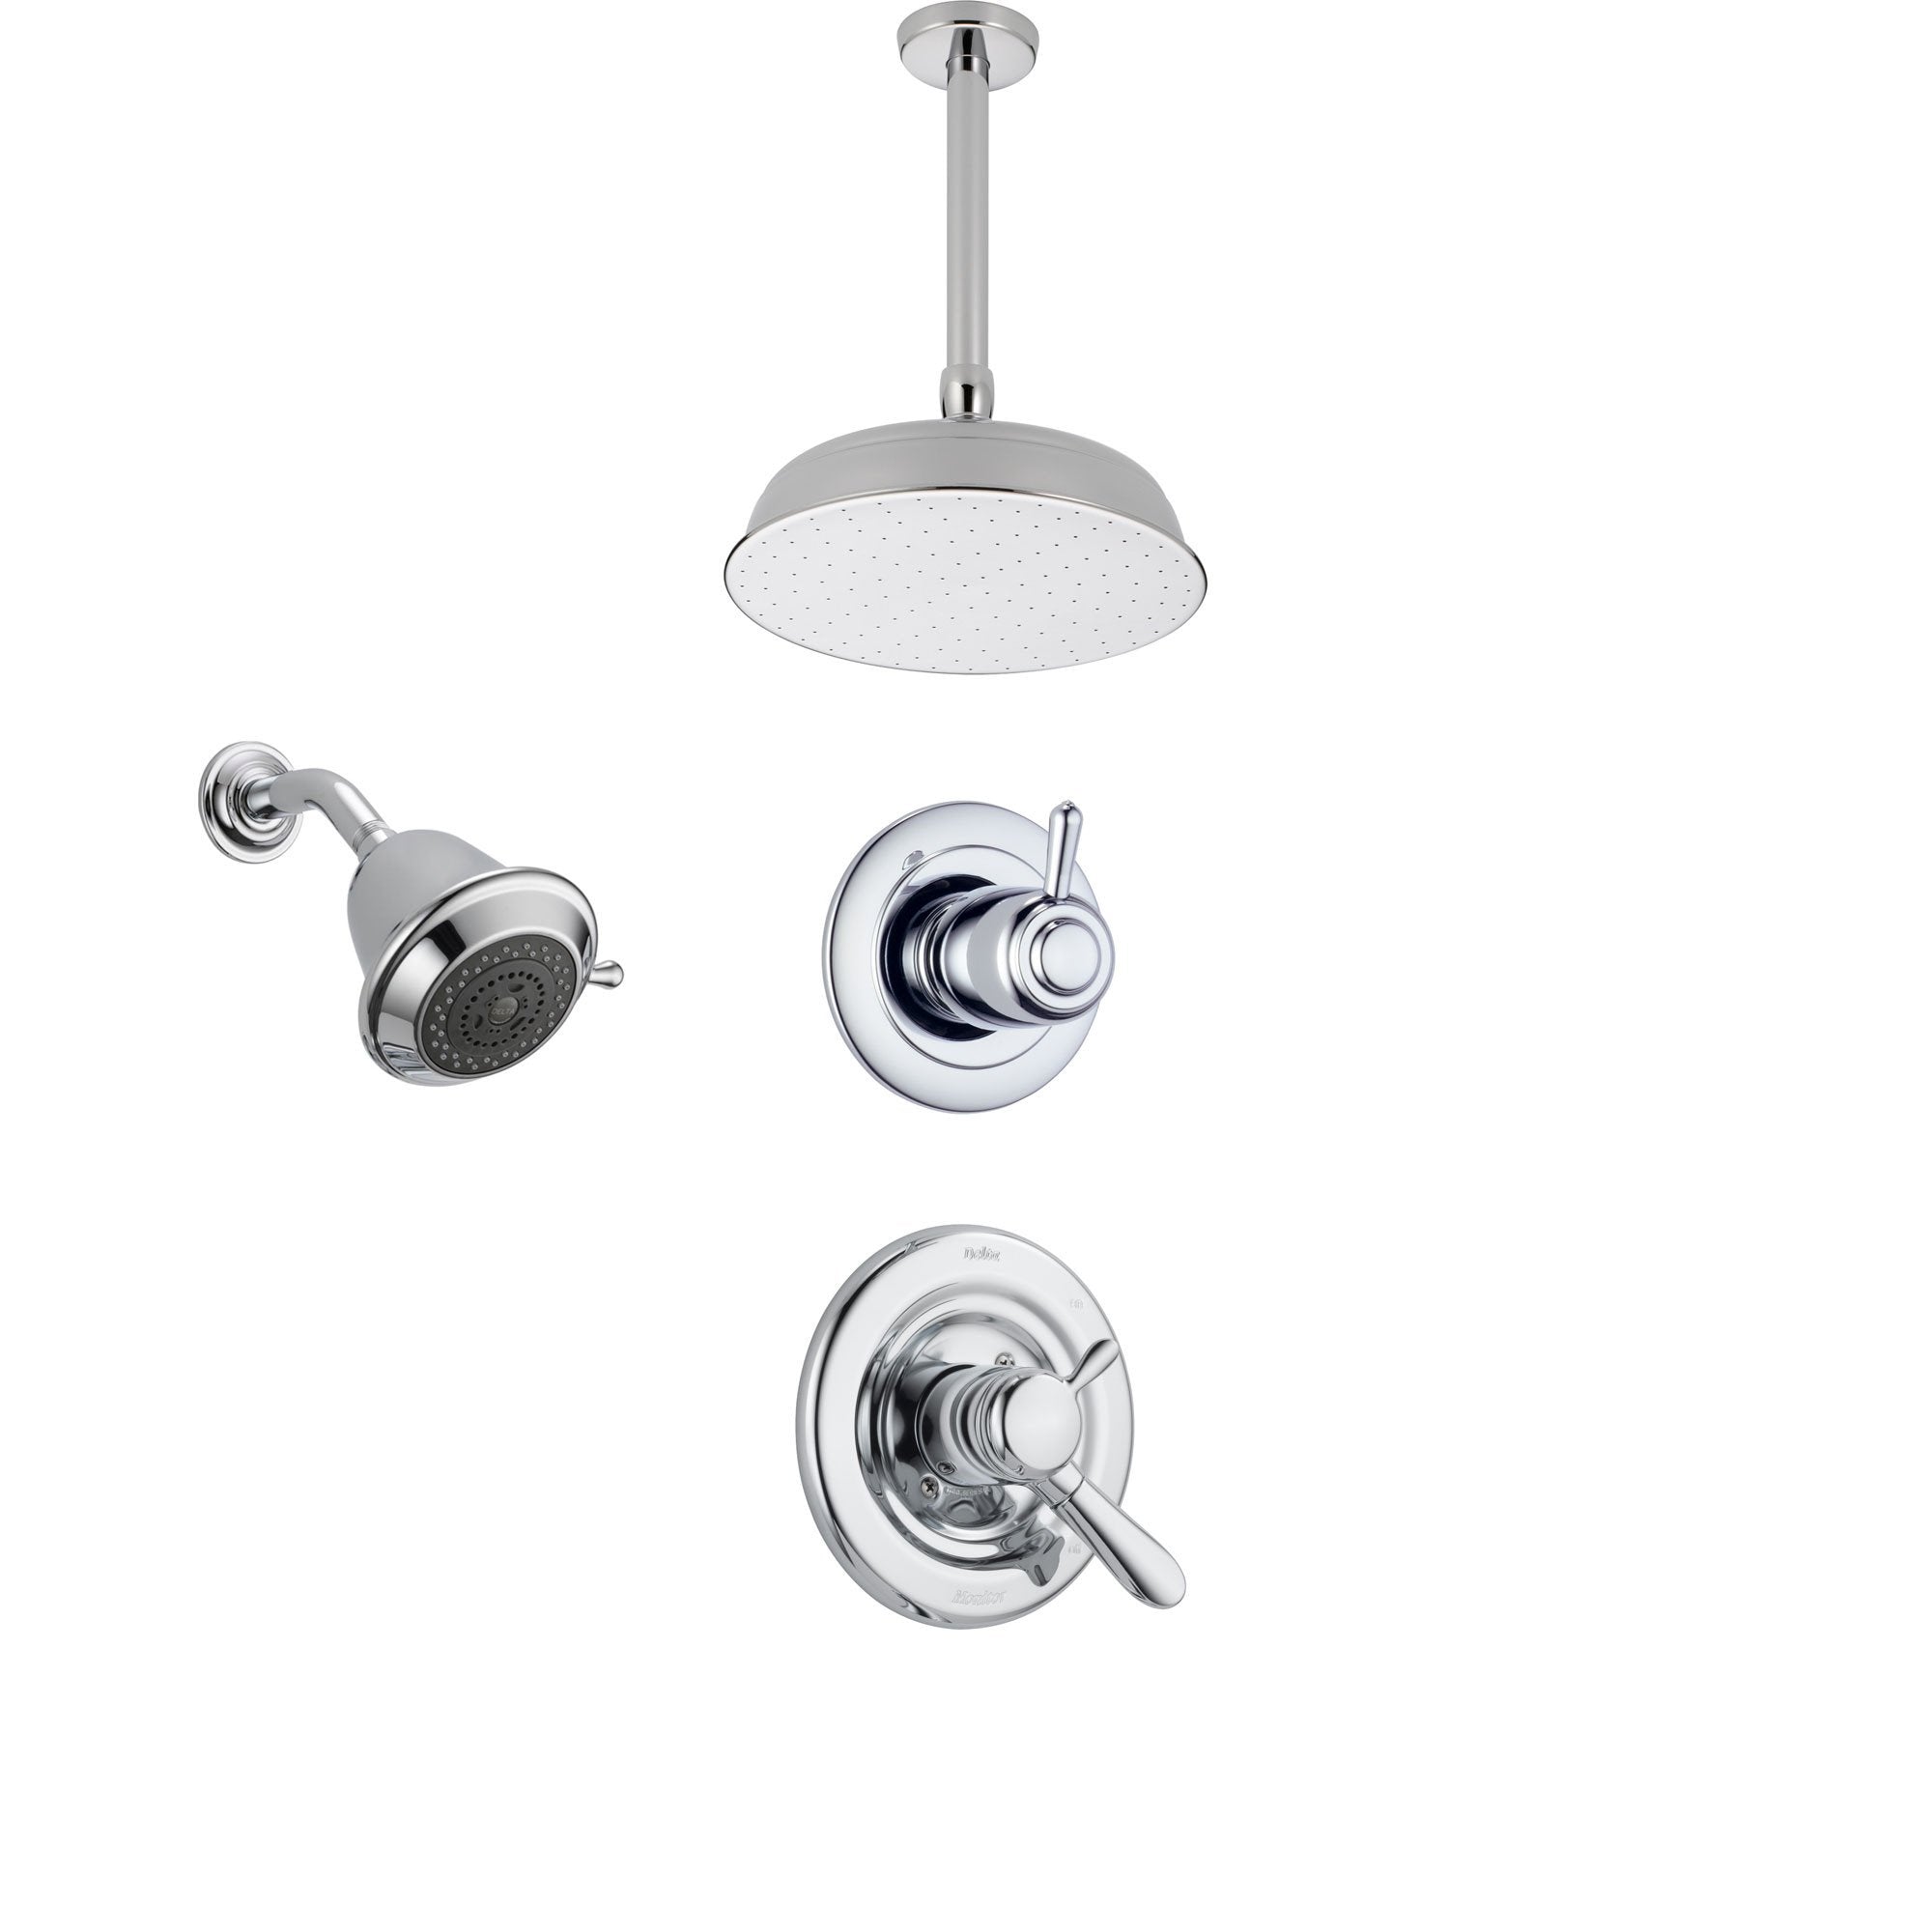 Delta Lahara Chrome Shower System with Dual Control Shower Handle, 3-setting Diverter, Large Ceiling Mount Rain Showerhead, and Wall Mount Showerhead SS173883